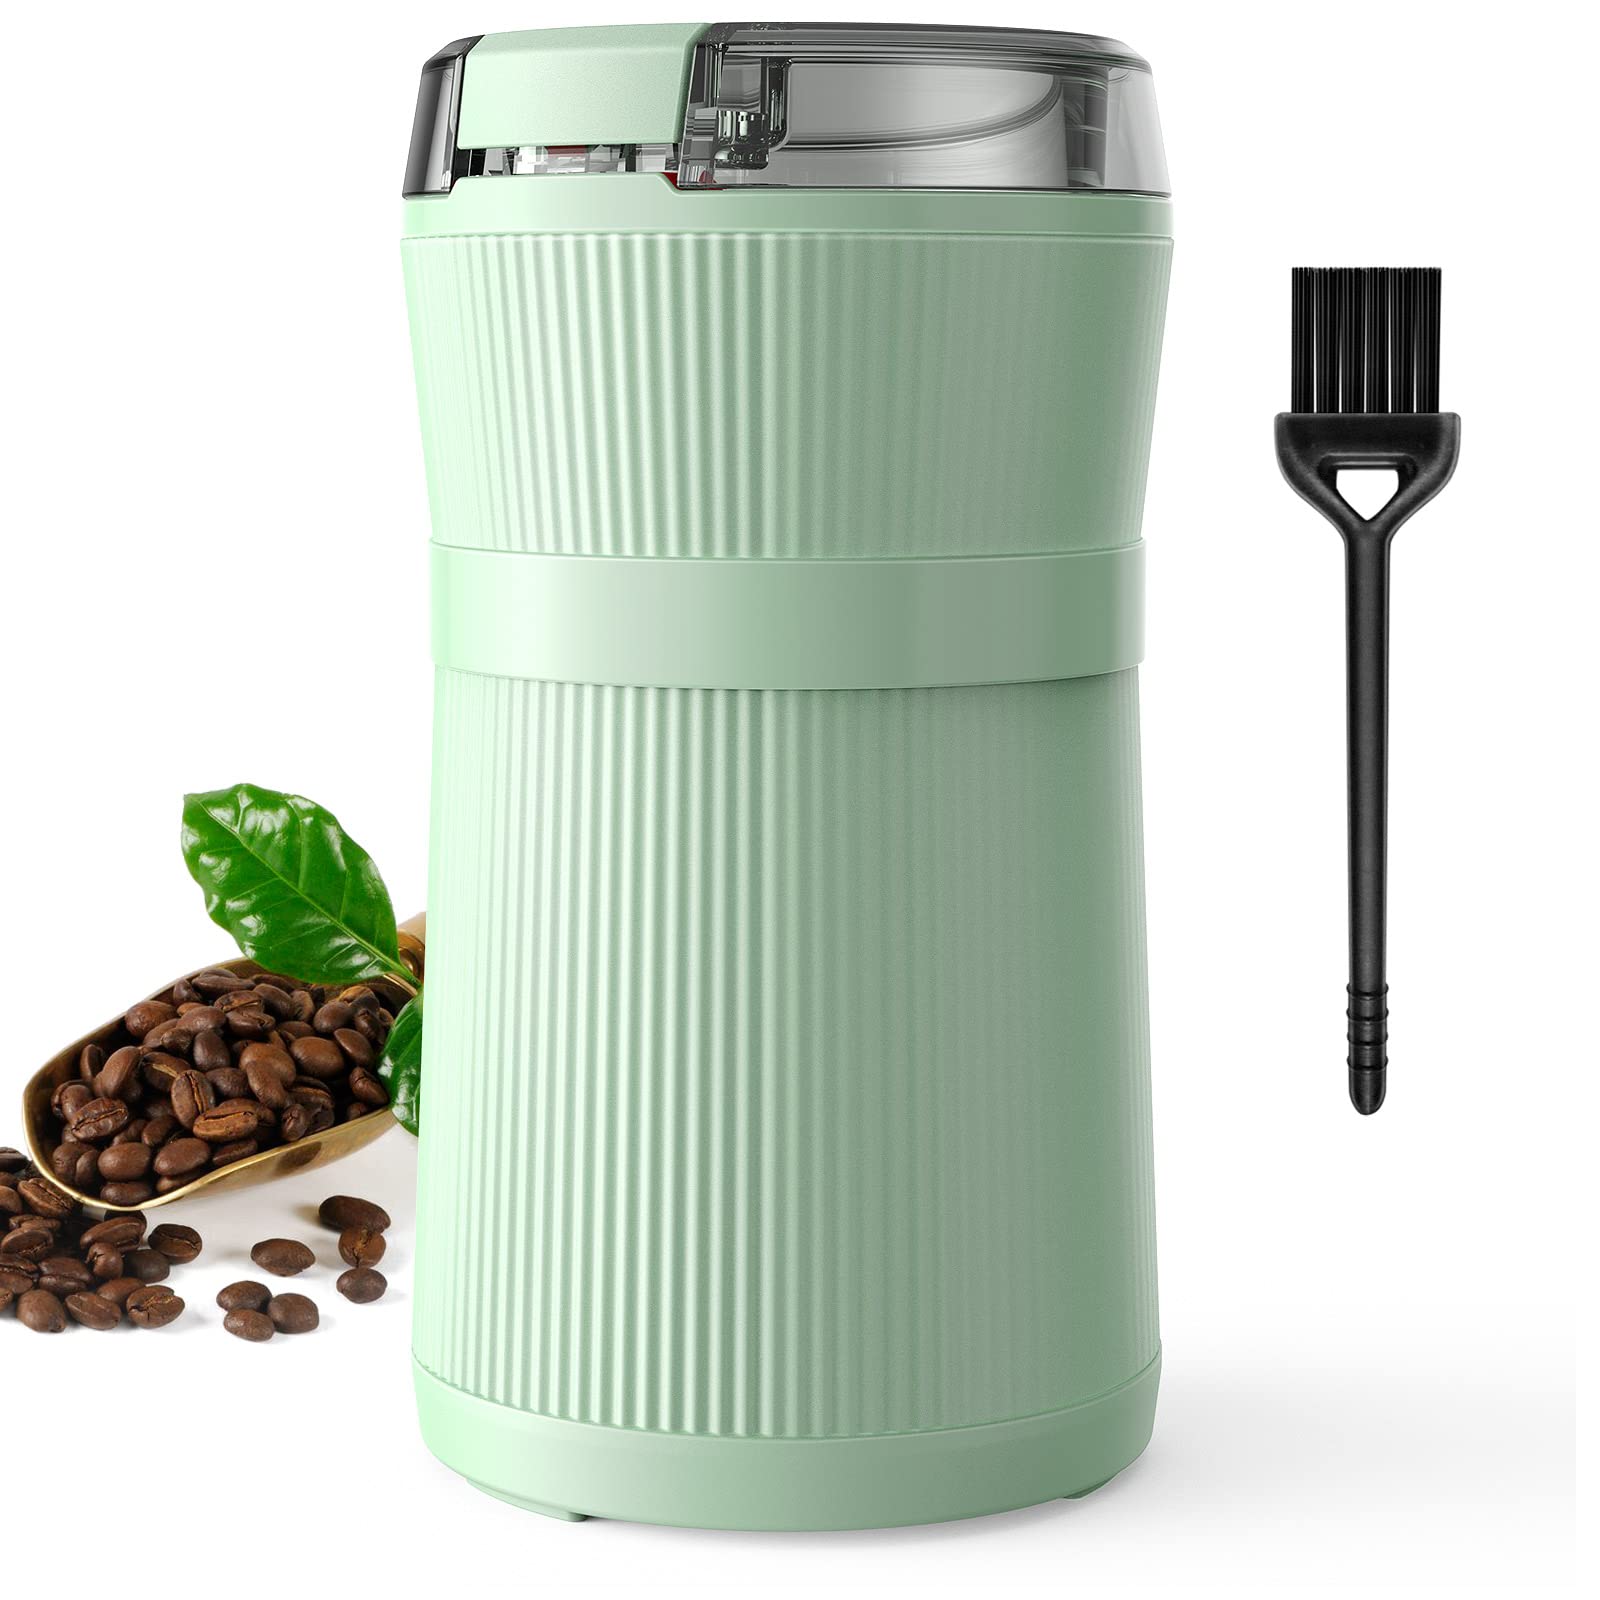 Quiet Electric Coffee Grinder with One-Touch Control,